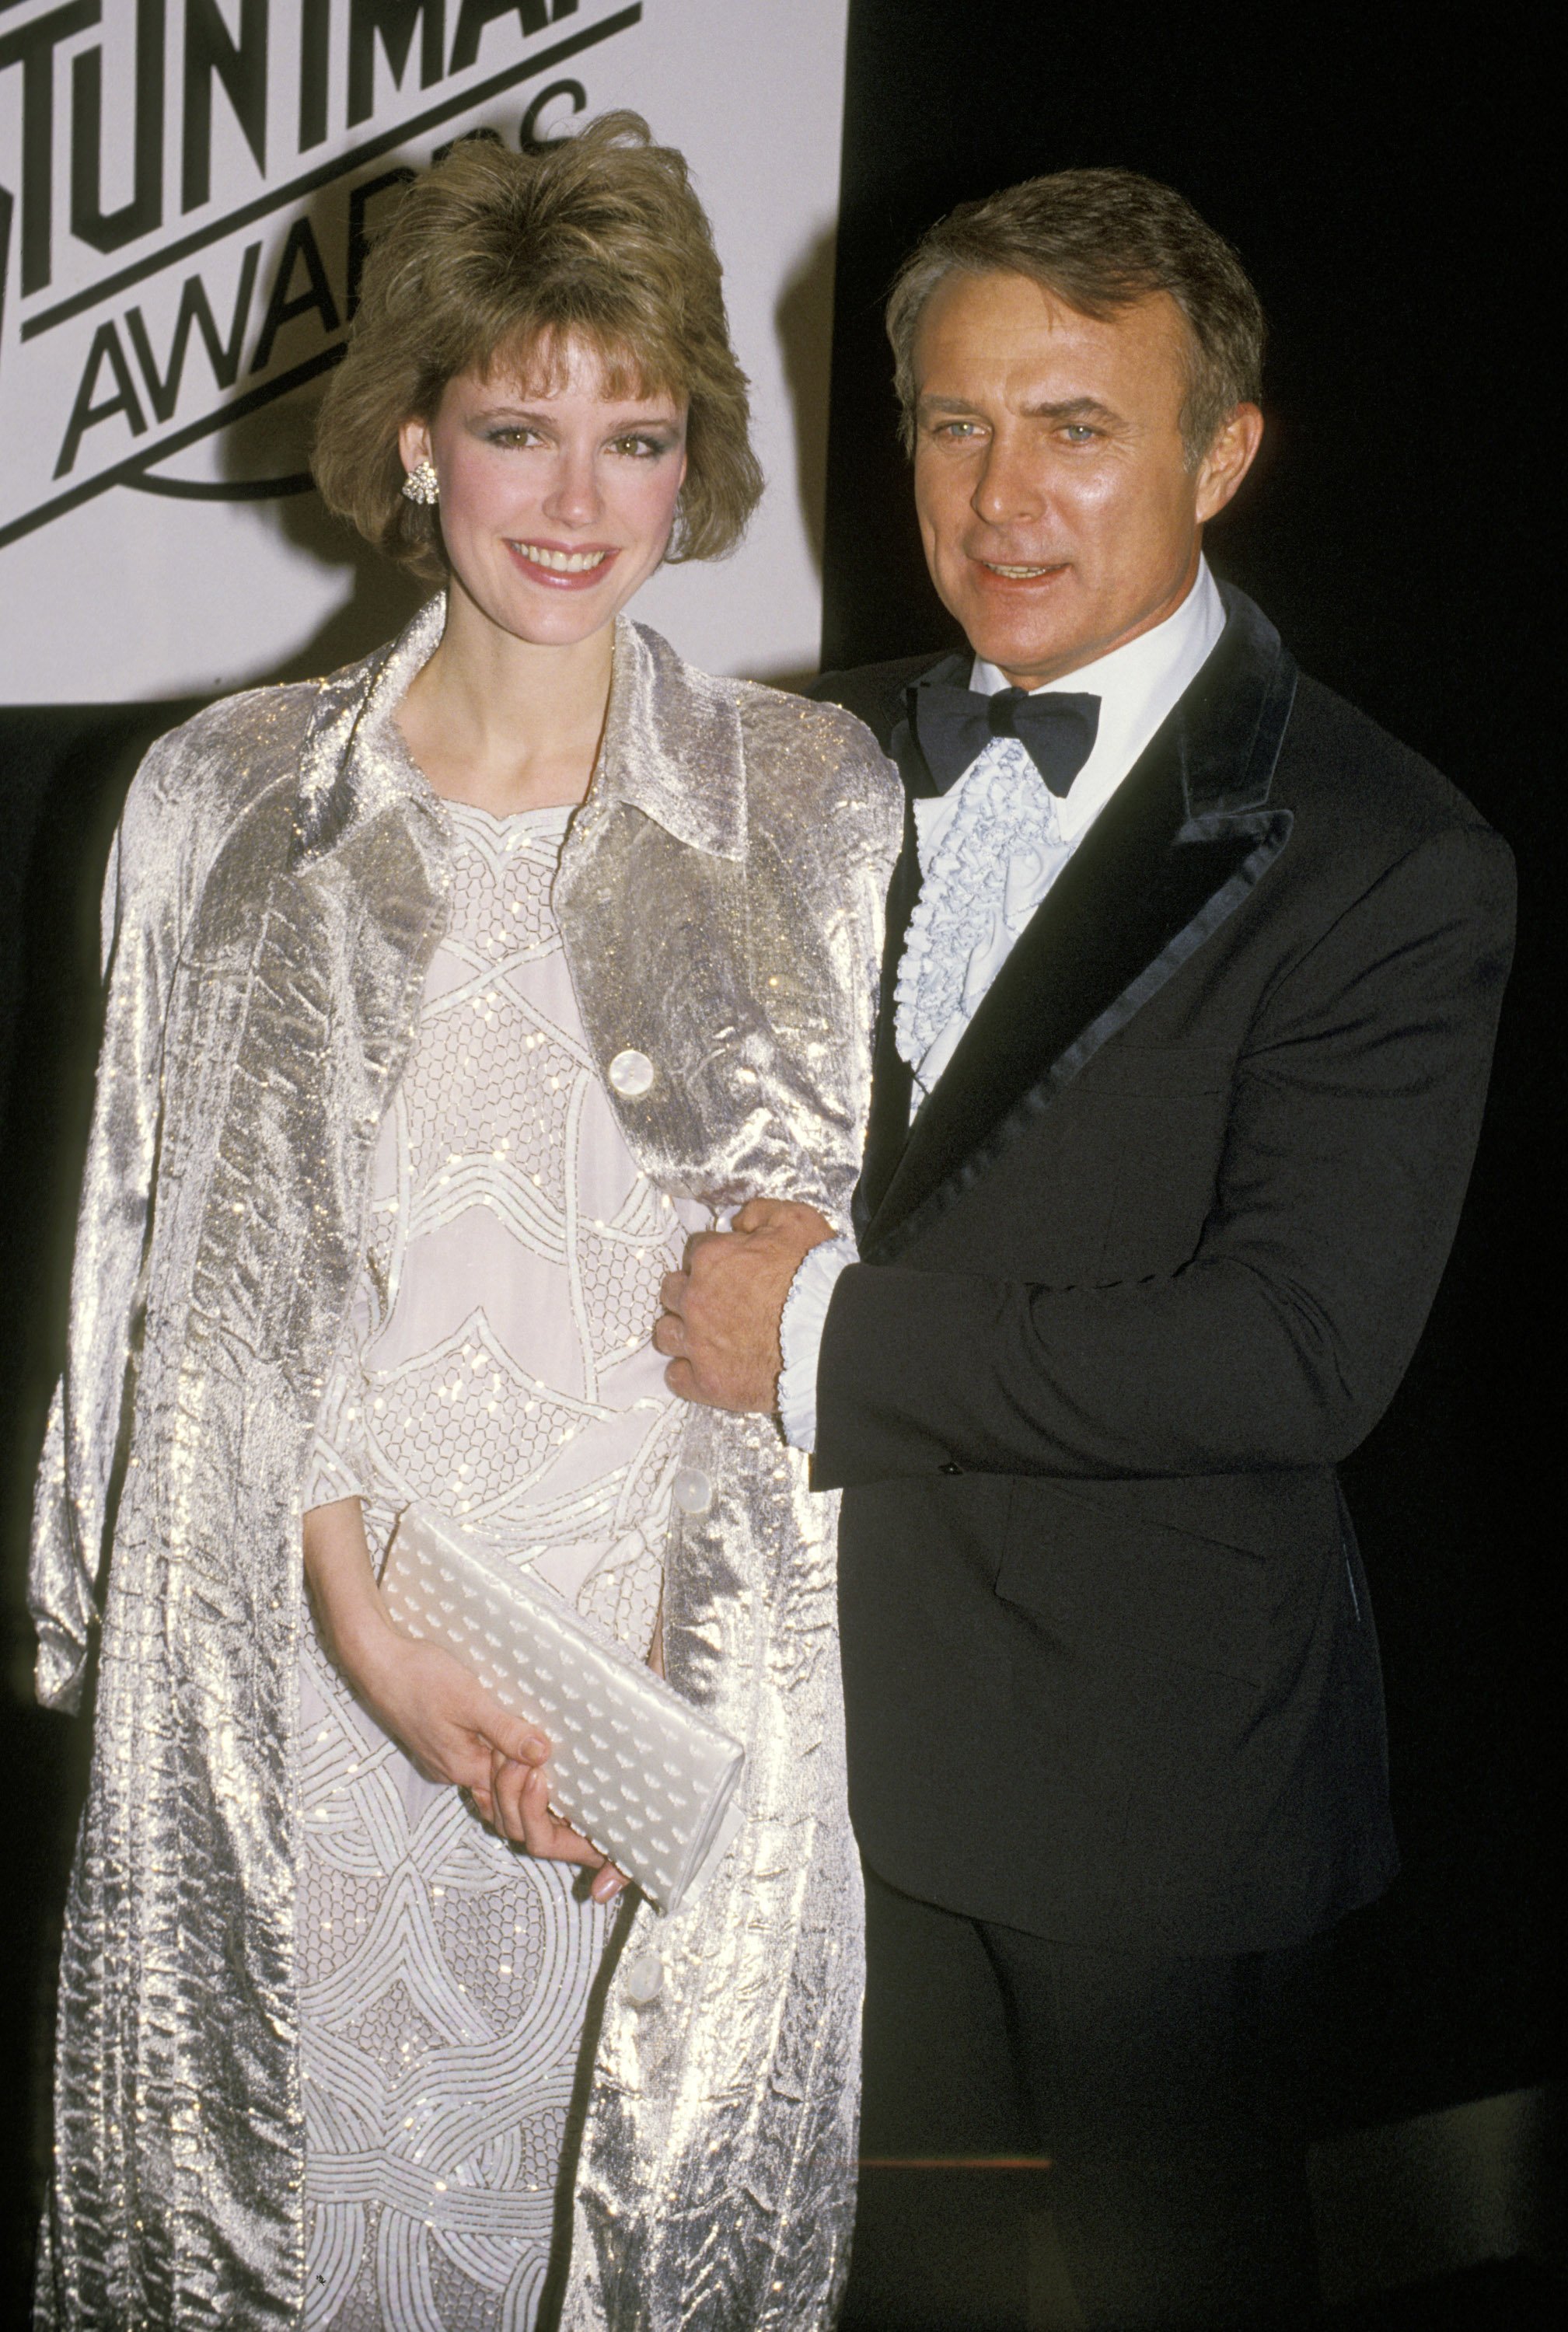 LaVelda Fann and her husband Robert Conrad during 1st Annual Stuntman's Awards Show at KABC TV Studios on February 2, 1985 in Los Angeles, California ┃Source: Getty Images